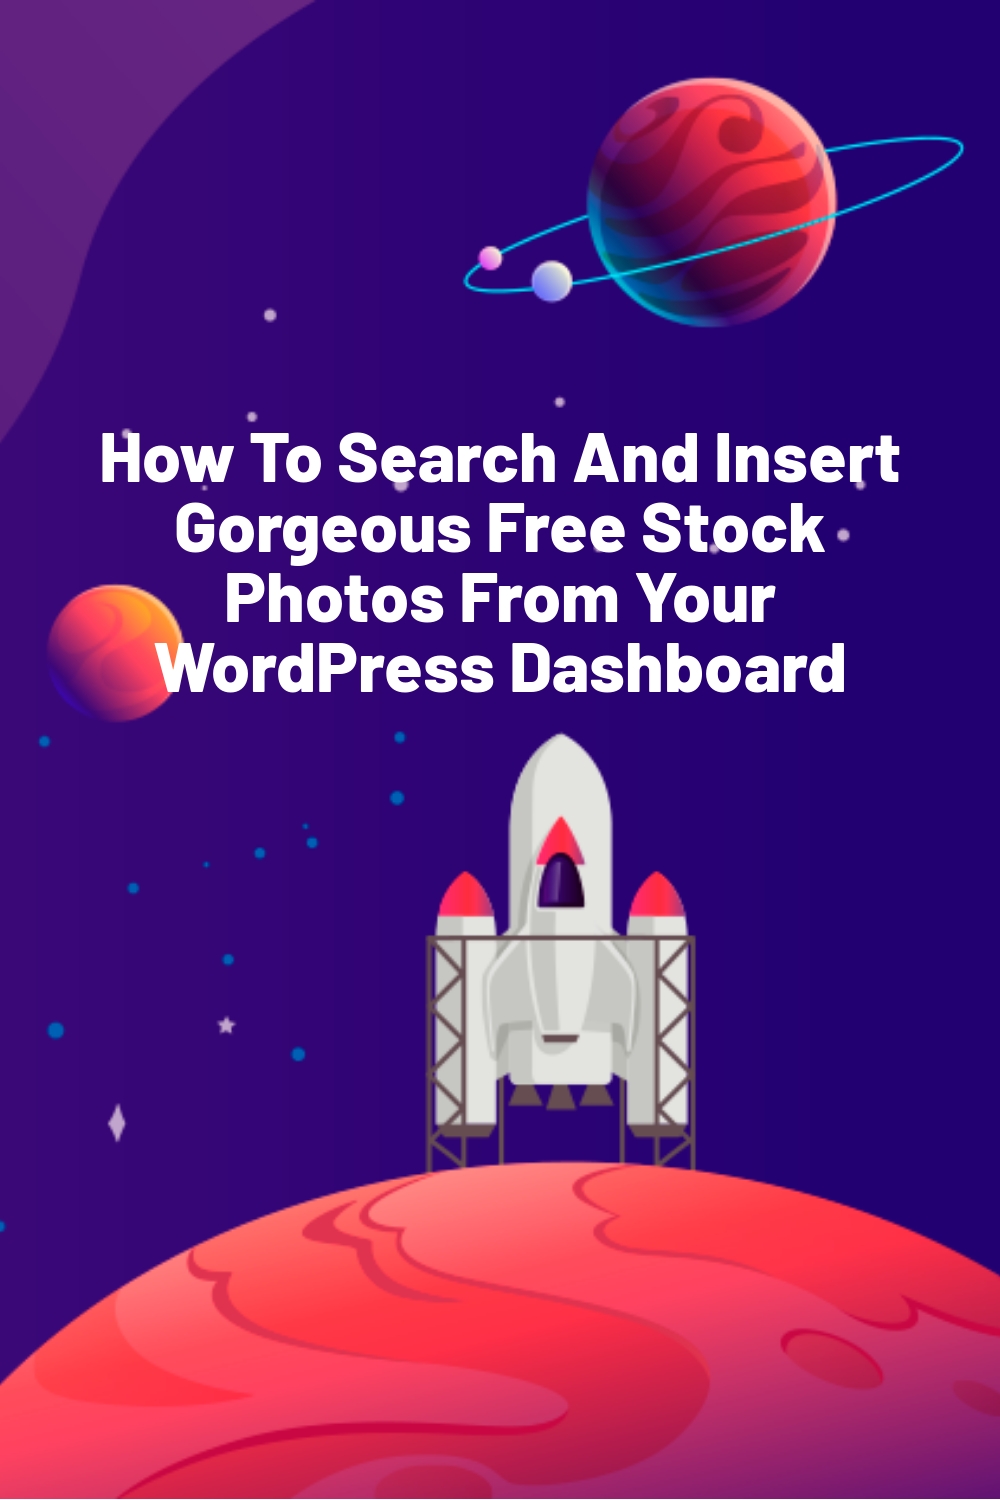 How To Search And Insert Gorgeous Free Stock Photos From Your WordPress Dashboard